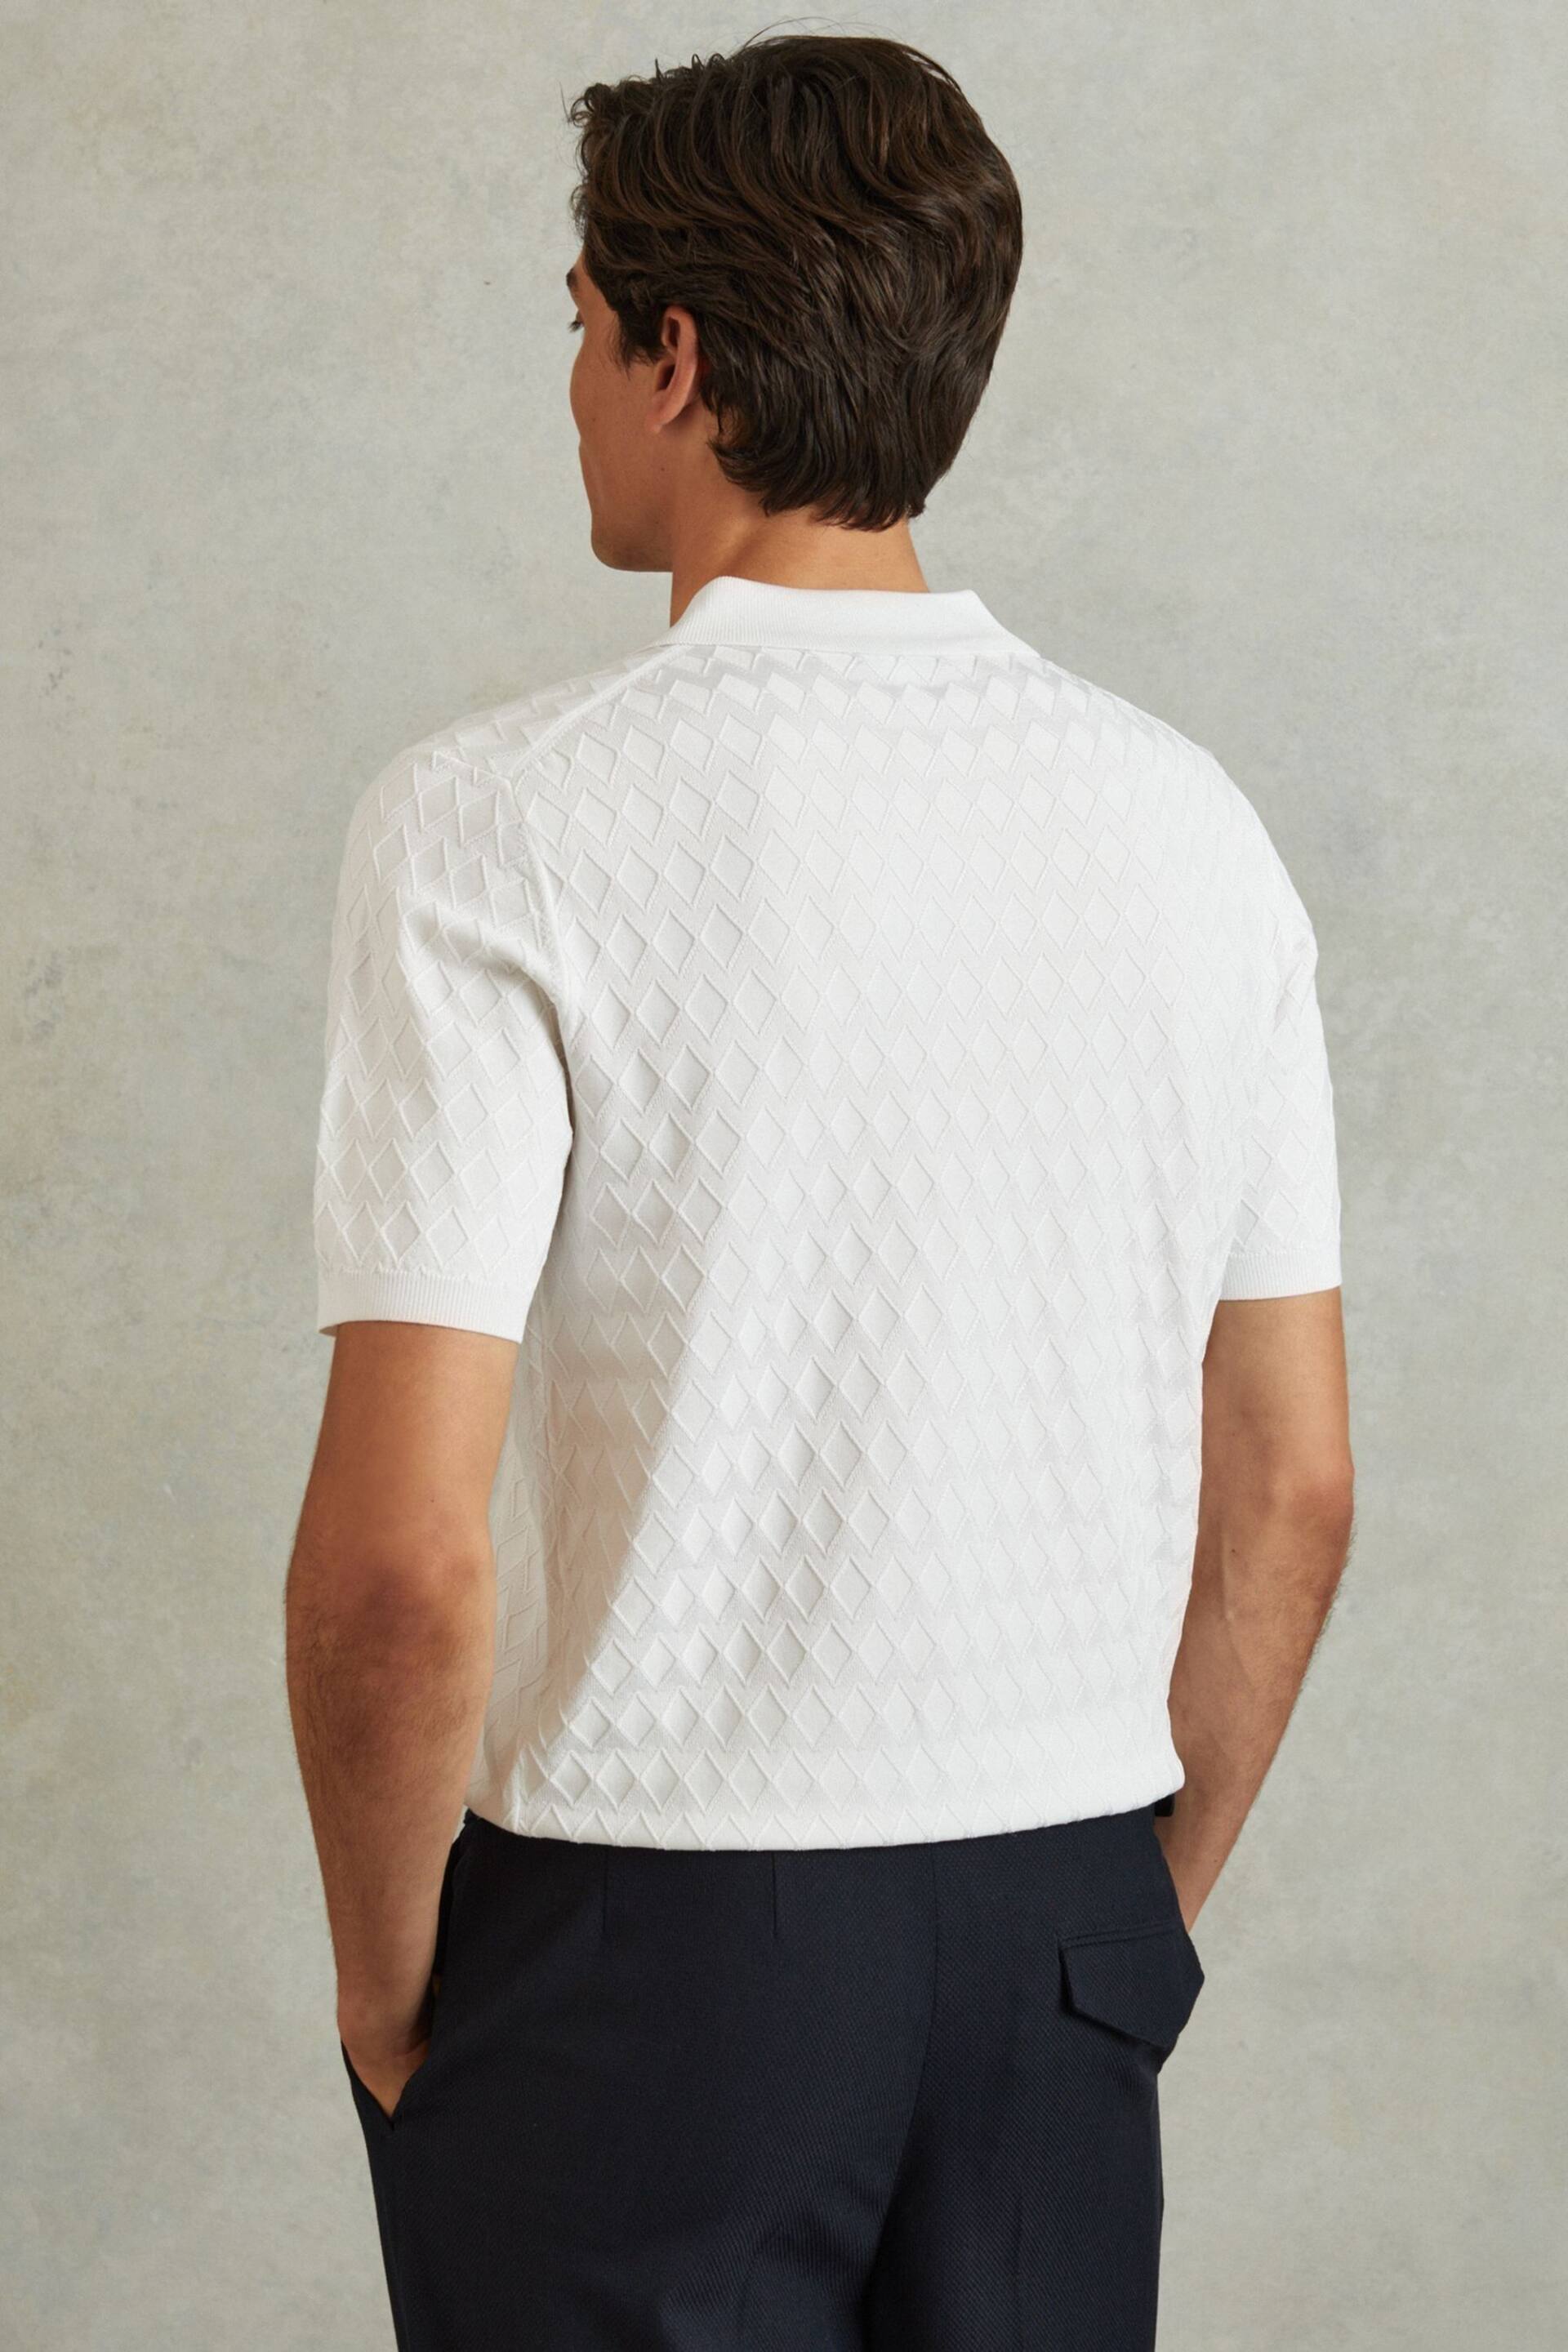 Reiss White Rizzo Half-Zip Knitted Polo Shirt - Image 4 of 5